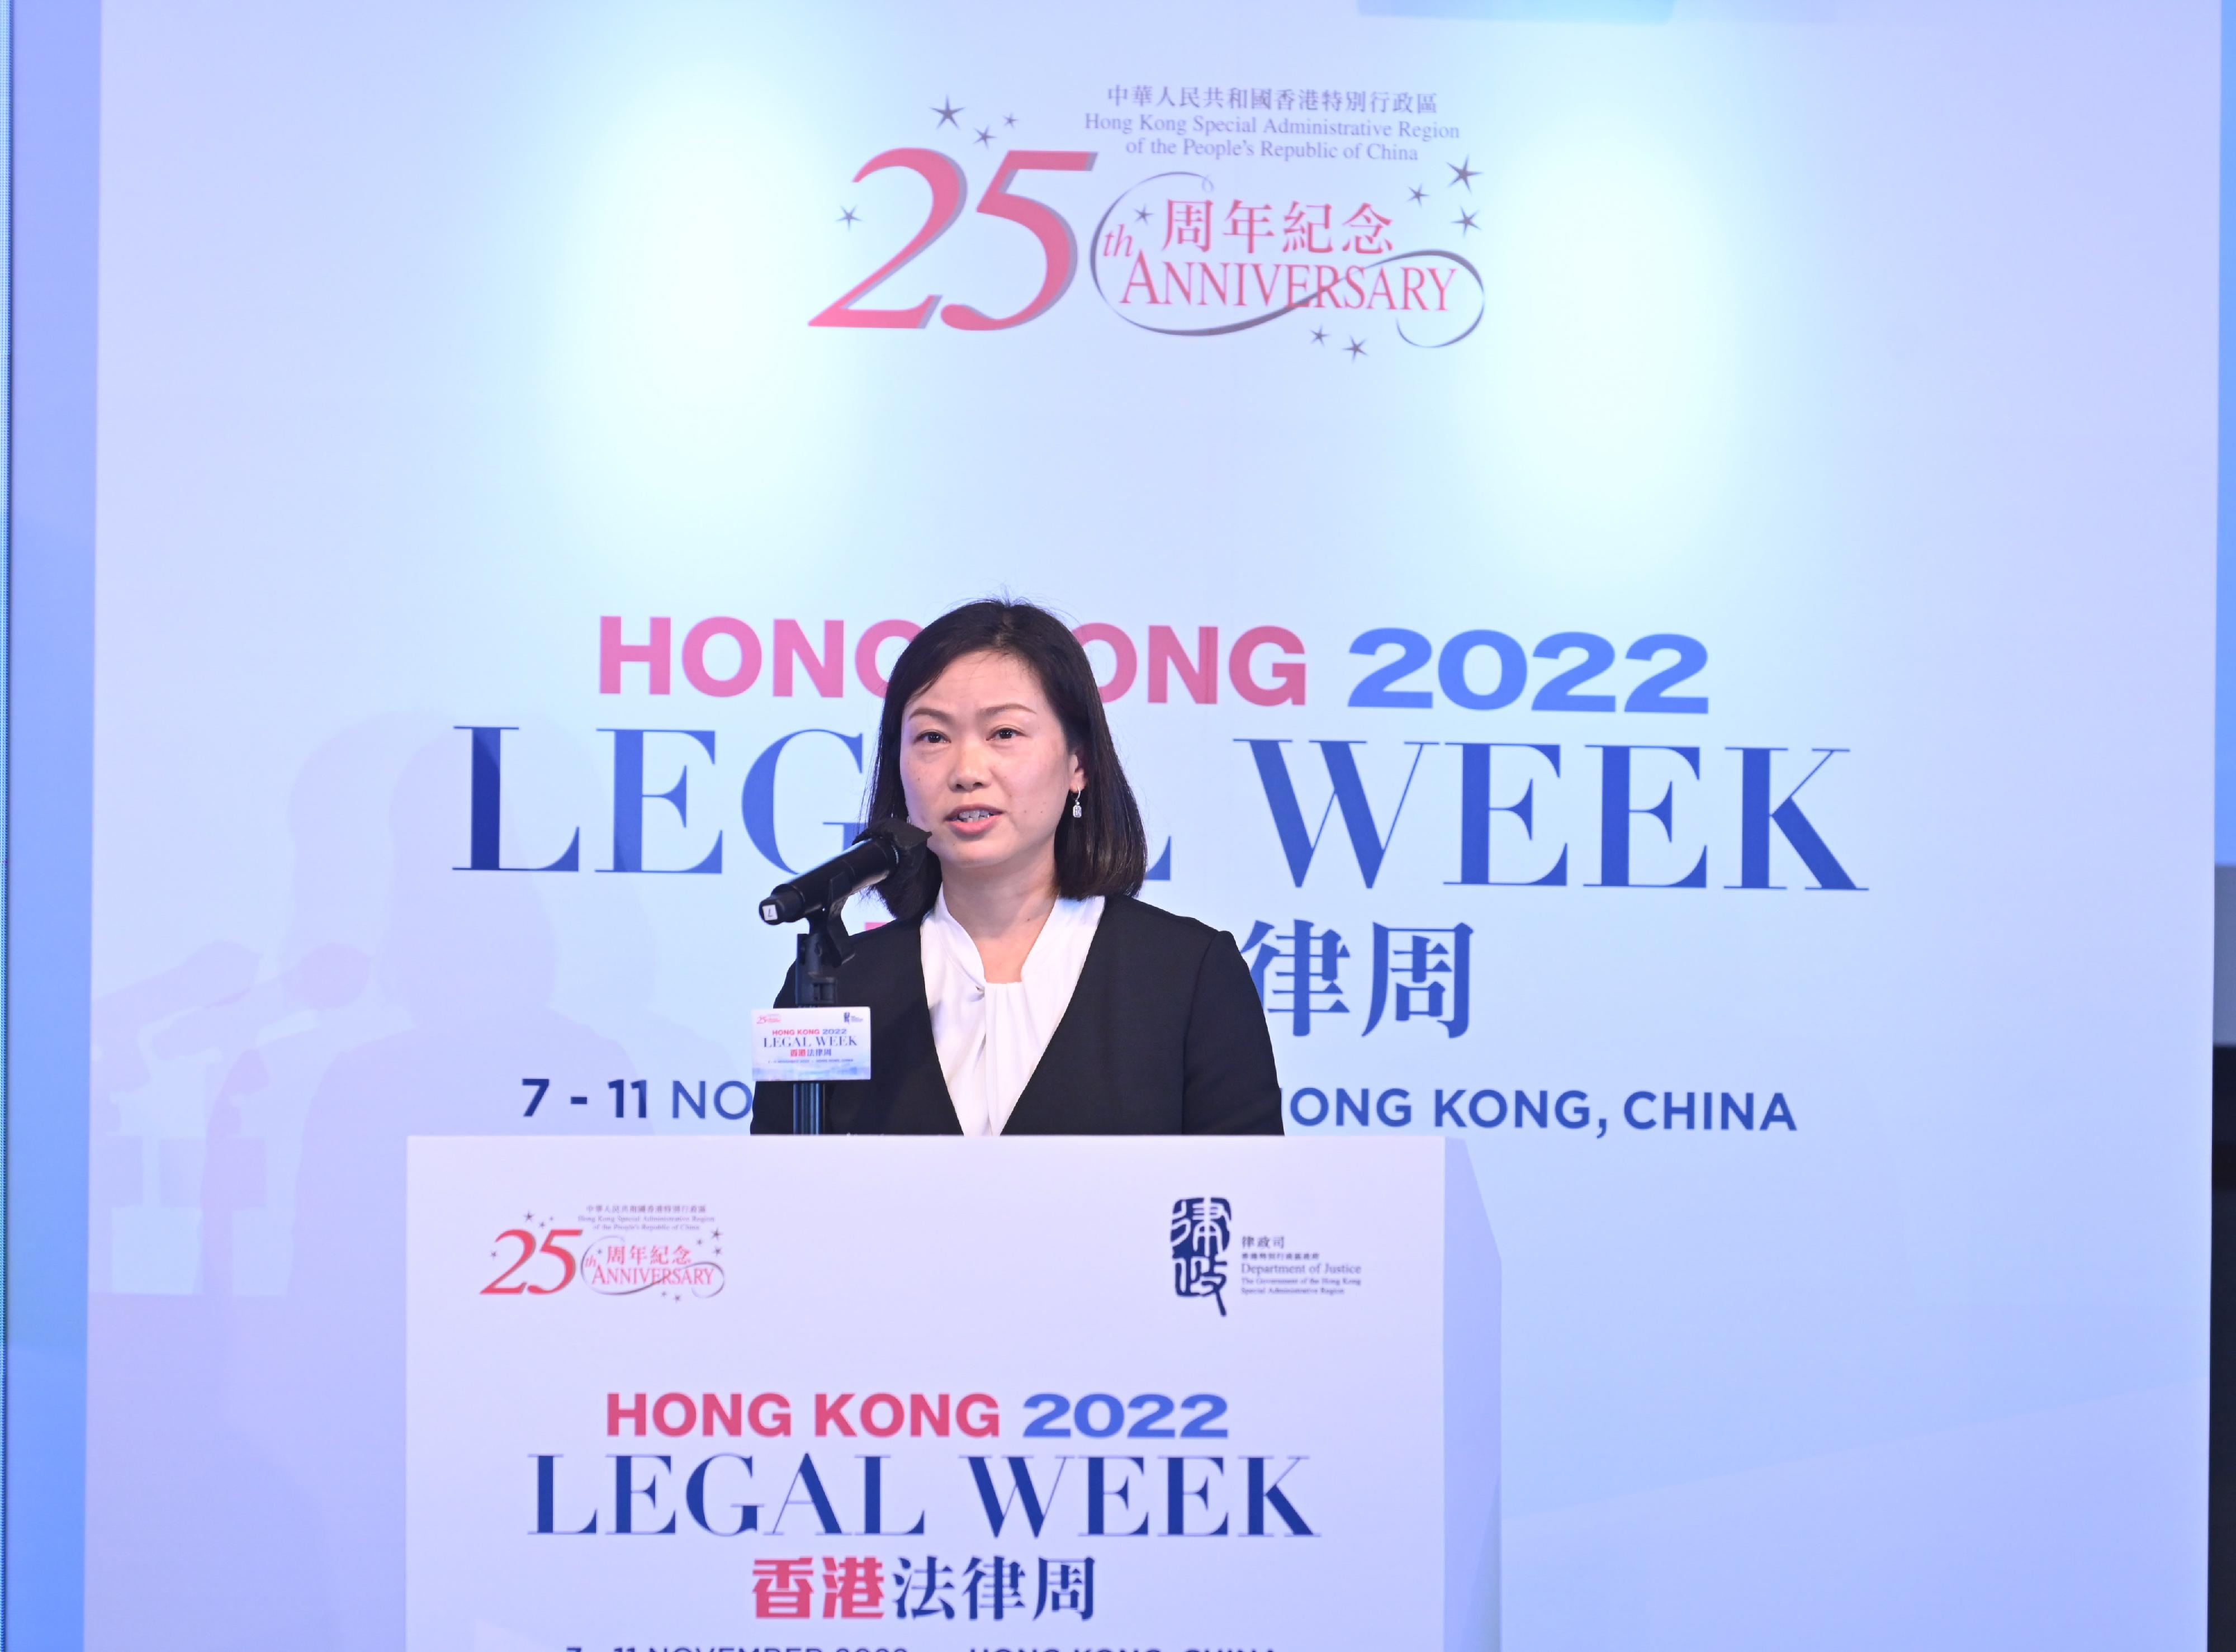 The Director-General of Trade and Industry, Ms Maggie Wong, delivers closing remarks at the Workshop on ASEAN Online Dispute Resolution: ODR in Facilitating Cross-Border Trade and Investment for ASEAN and Hong Kong Businesses under Hong Kong Legal Week 2022 today (November 9).